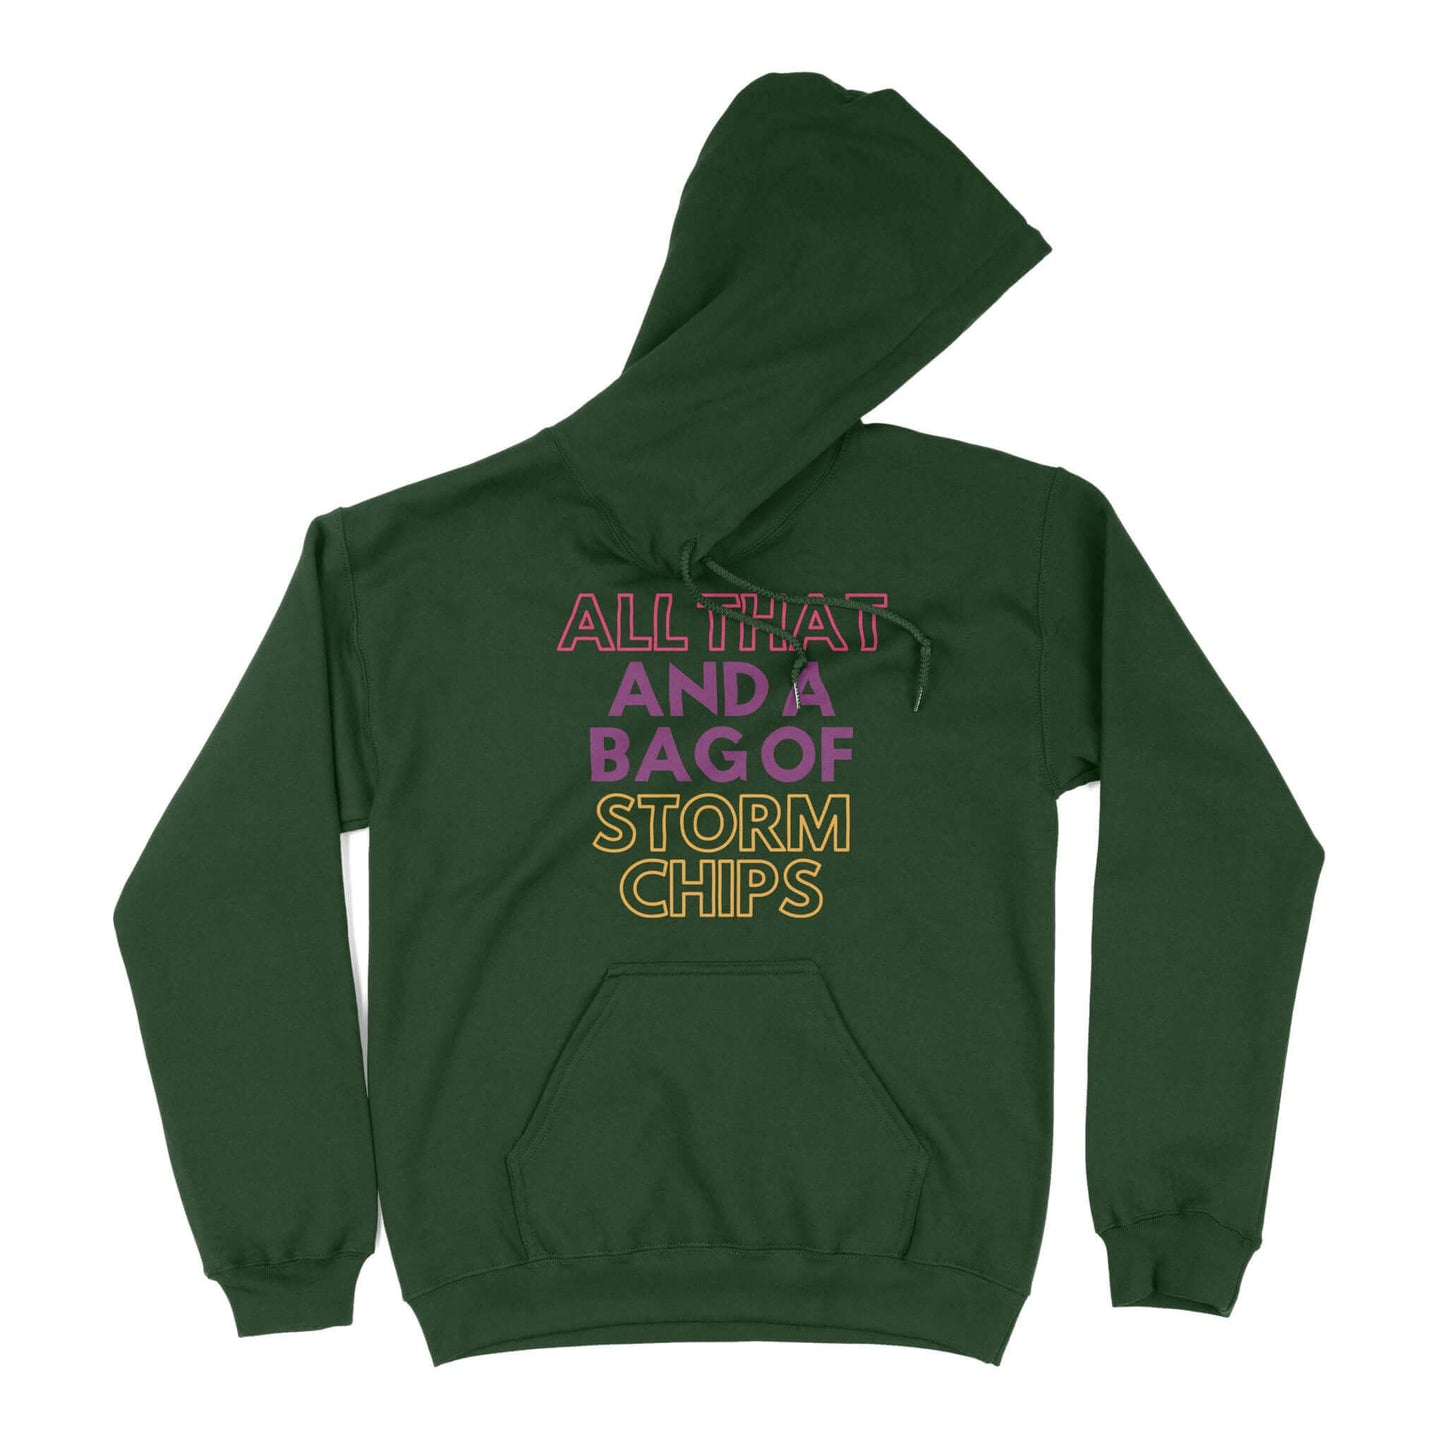 All That and a Bag of Storm Chips Unisex Hoodie in Color: Forest Green - East Coast AF Apparel